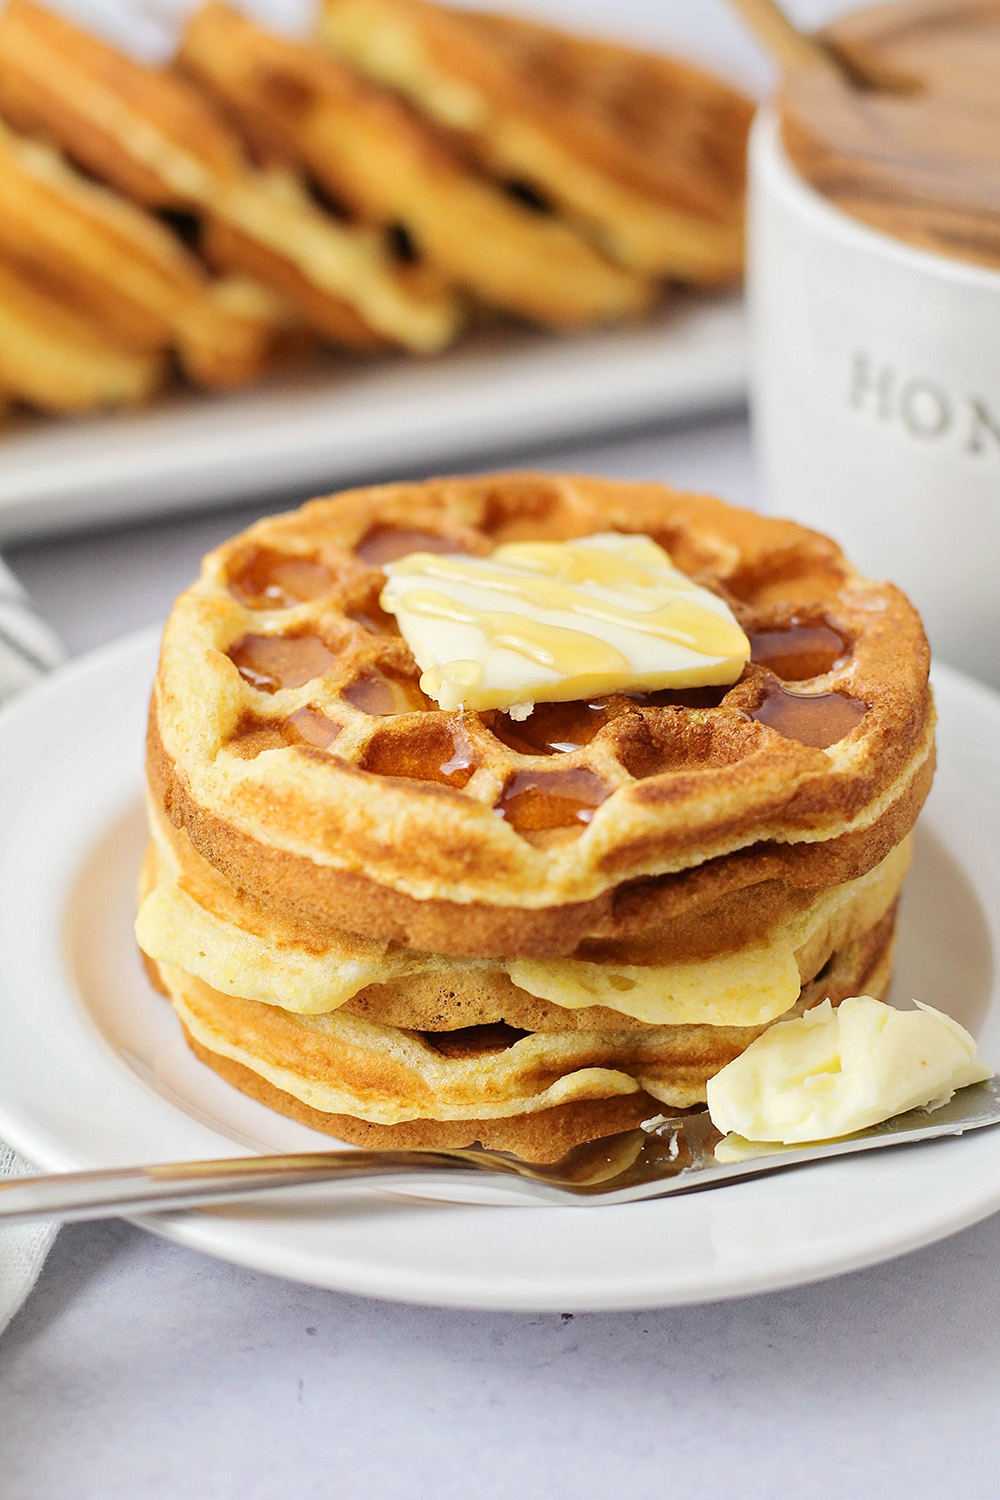 These honey cornbread waffles are made with simple ingredients, and so delicious! They're a fun and tasty twist on waffles for breakfast!